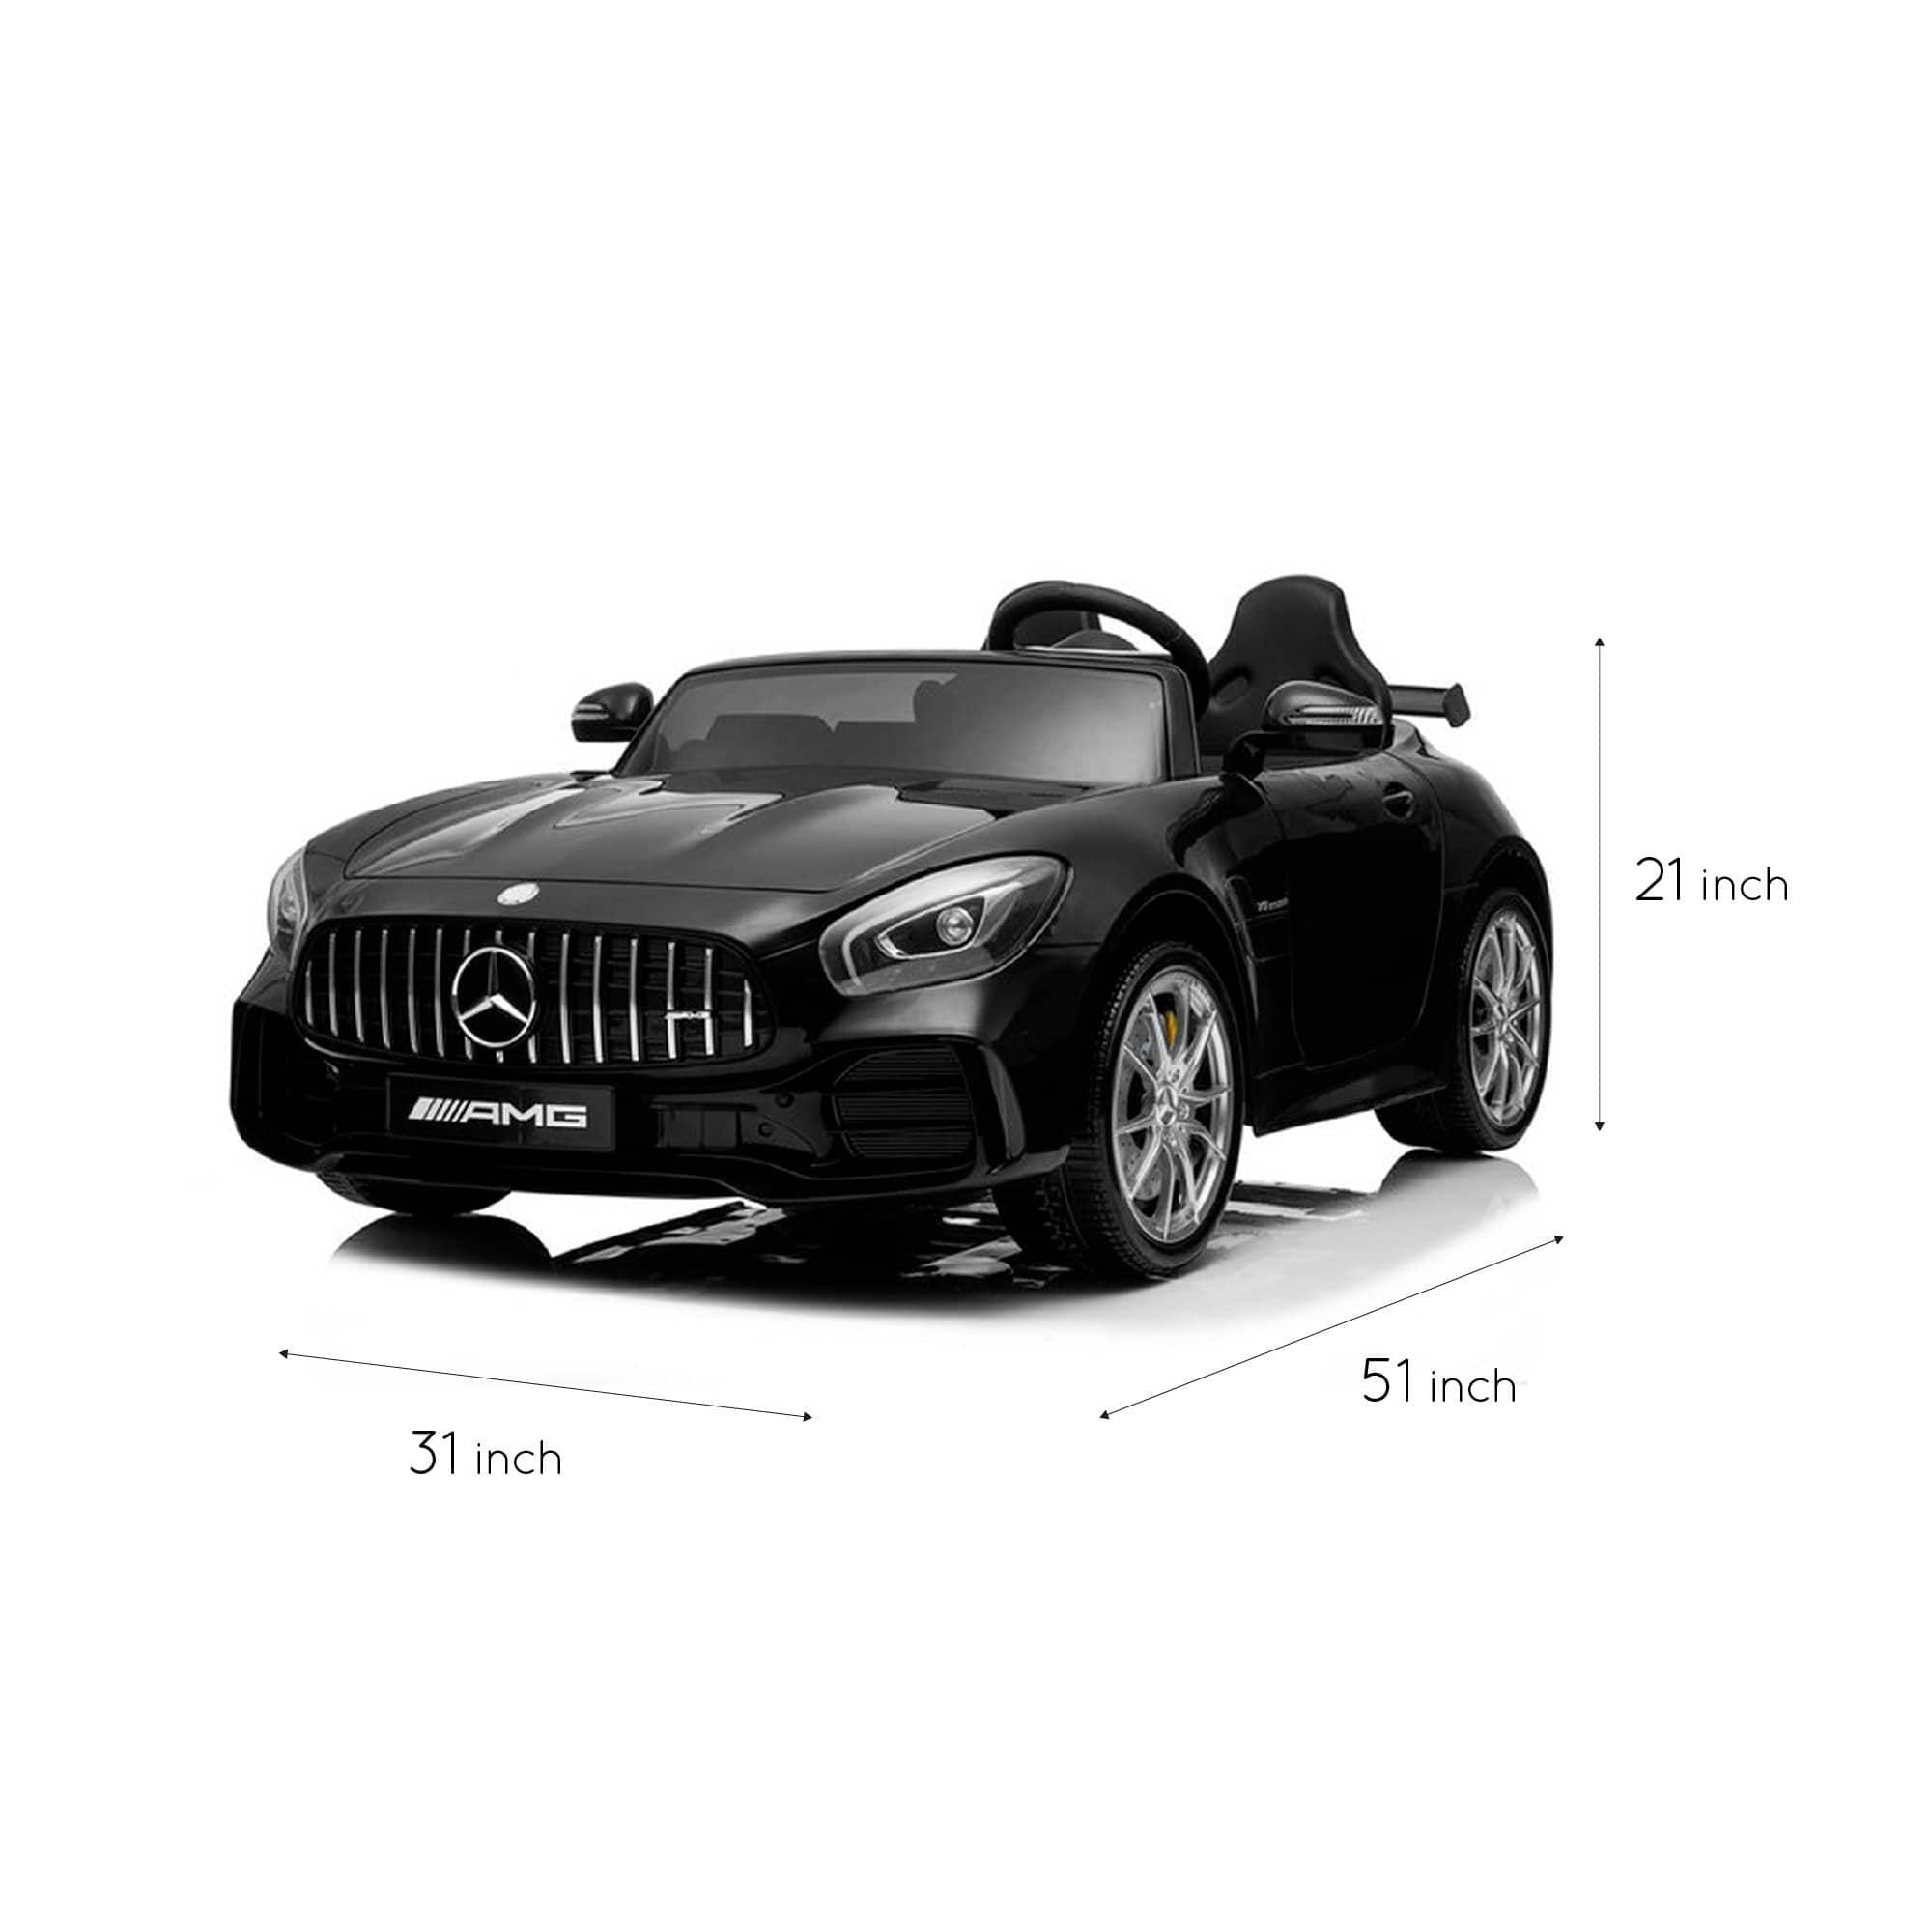 Licensed Mercedes Benz GTR AMG 12V Battery Operated 2 Seater Ride On Car With Parental Remote by Freddo